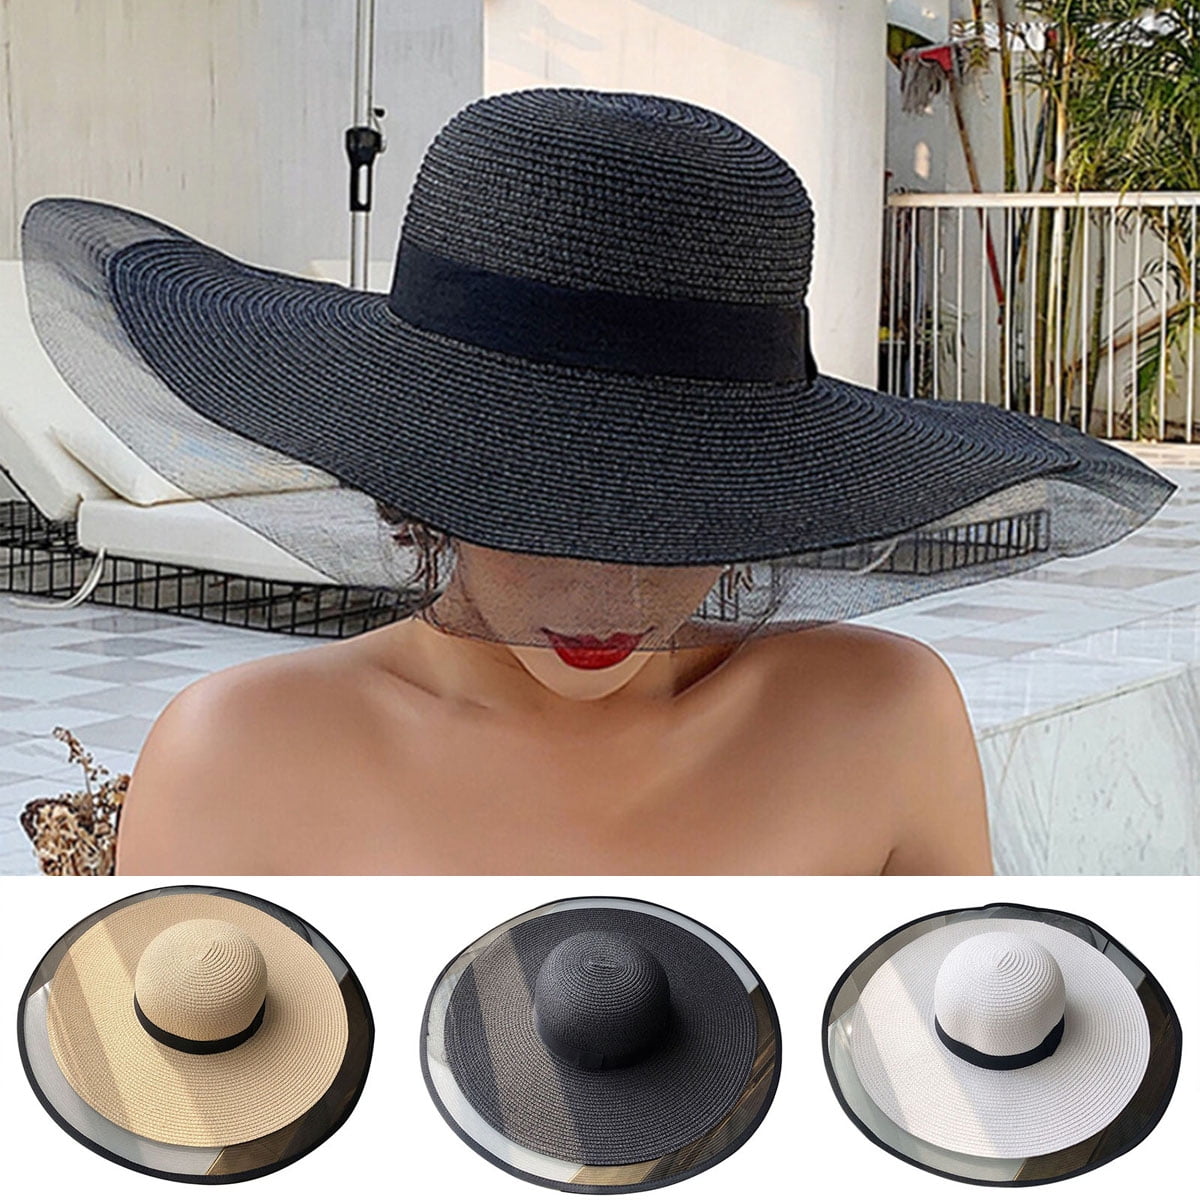 Travelwant Women's Folable Floppy Hat,Wide Brim Sun Protection Straw Hat,  Summer UV Protection Beach Cap